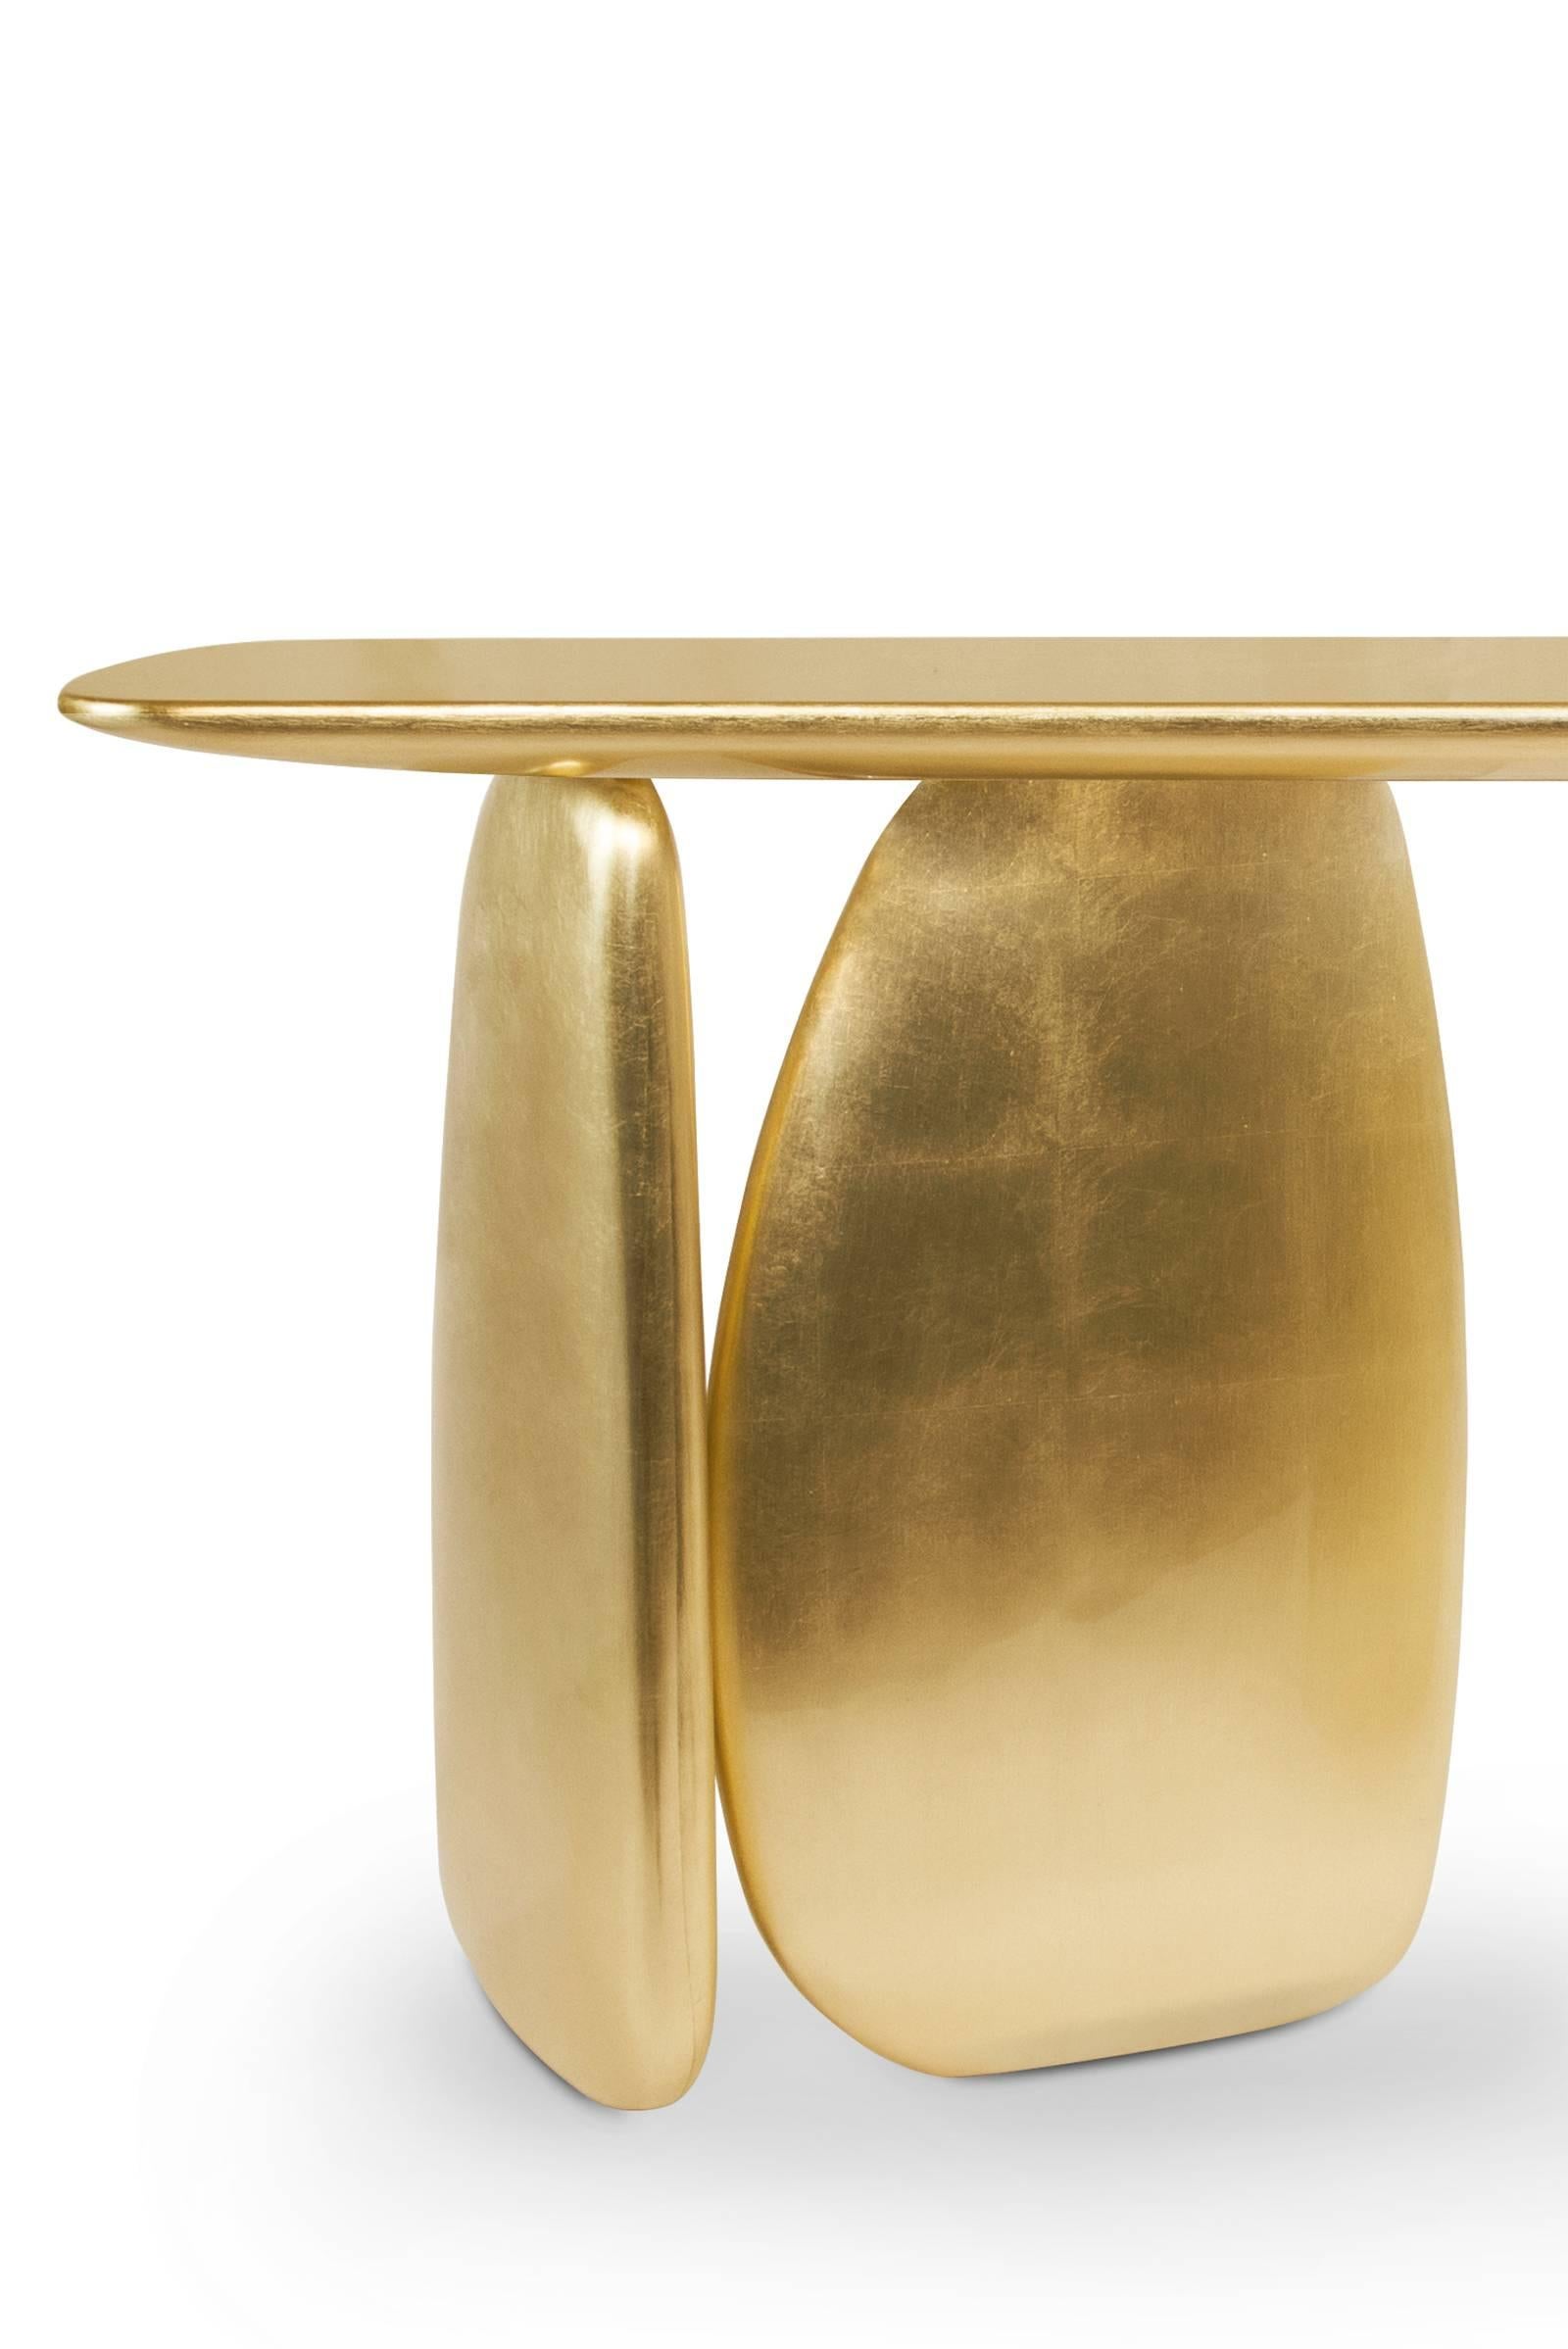 Portuguese Gold Pebble Console with Gold Leaf For Sale